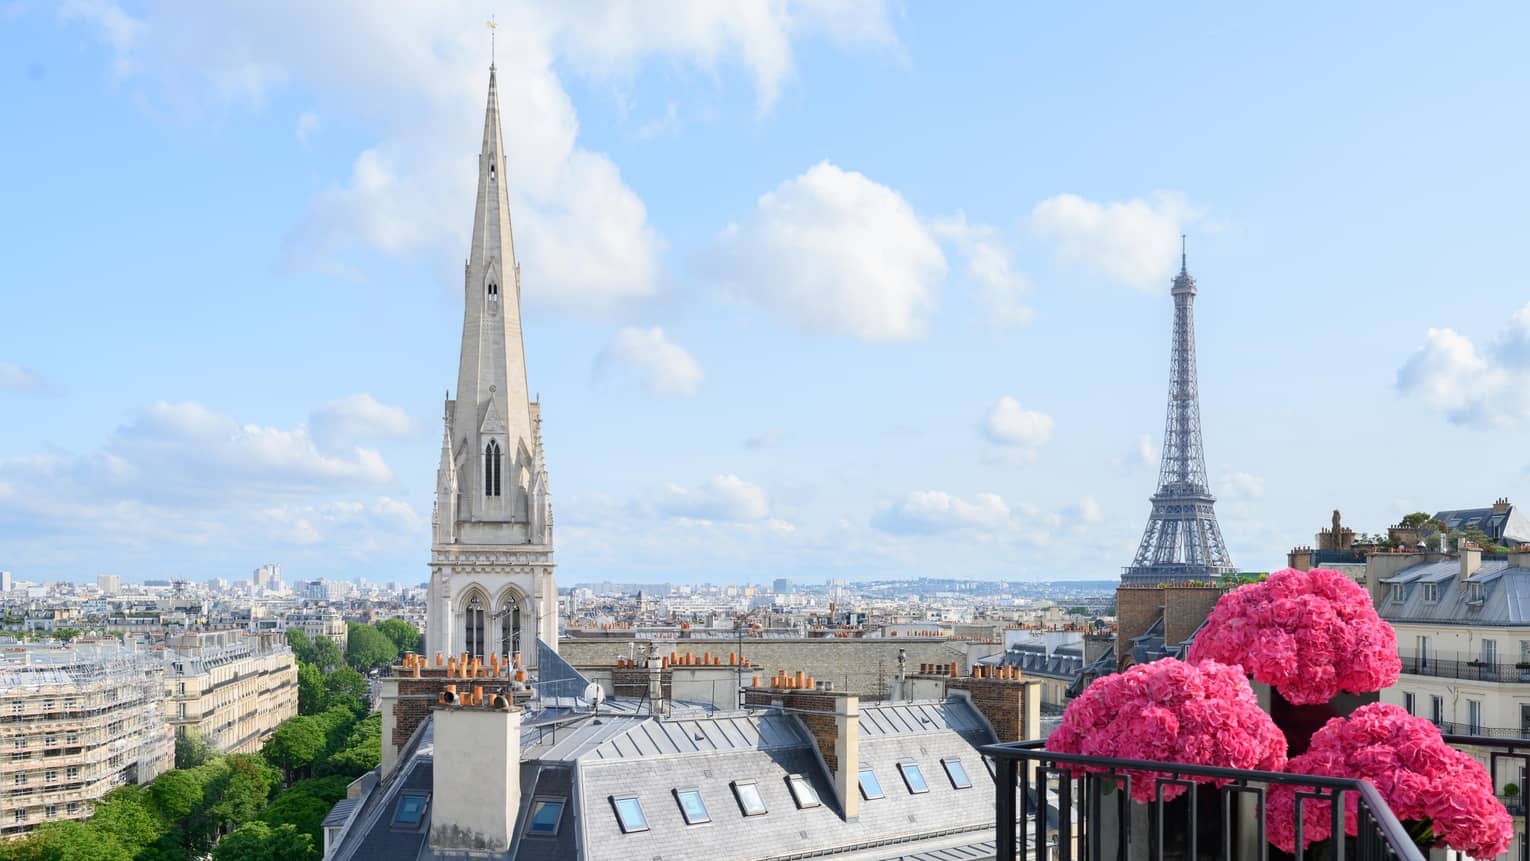 Pink flowers on balcony in front of Paris rooftops, cathedral and blue sky